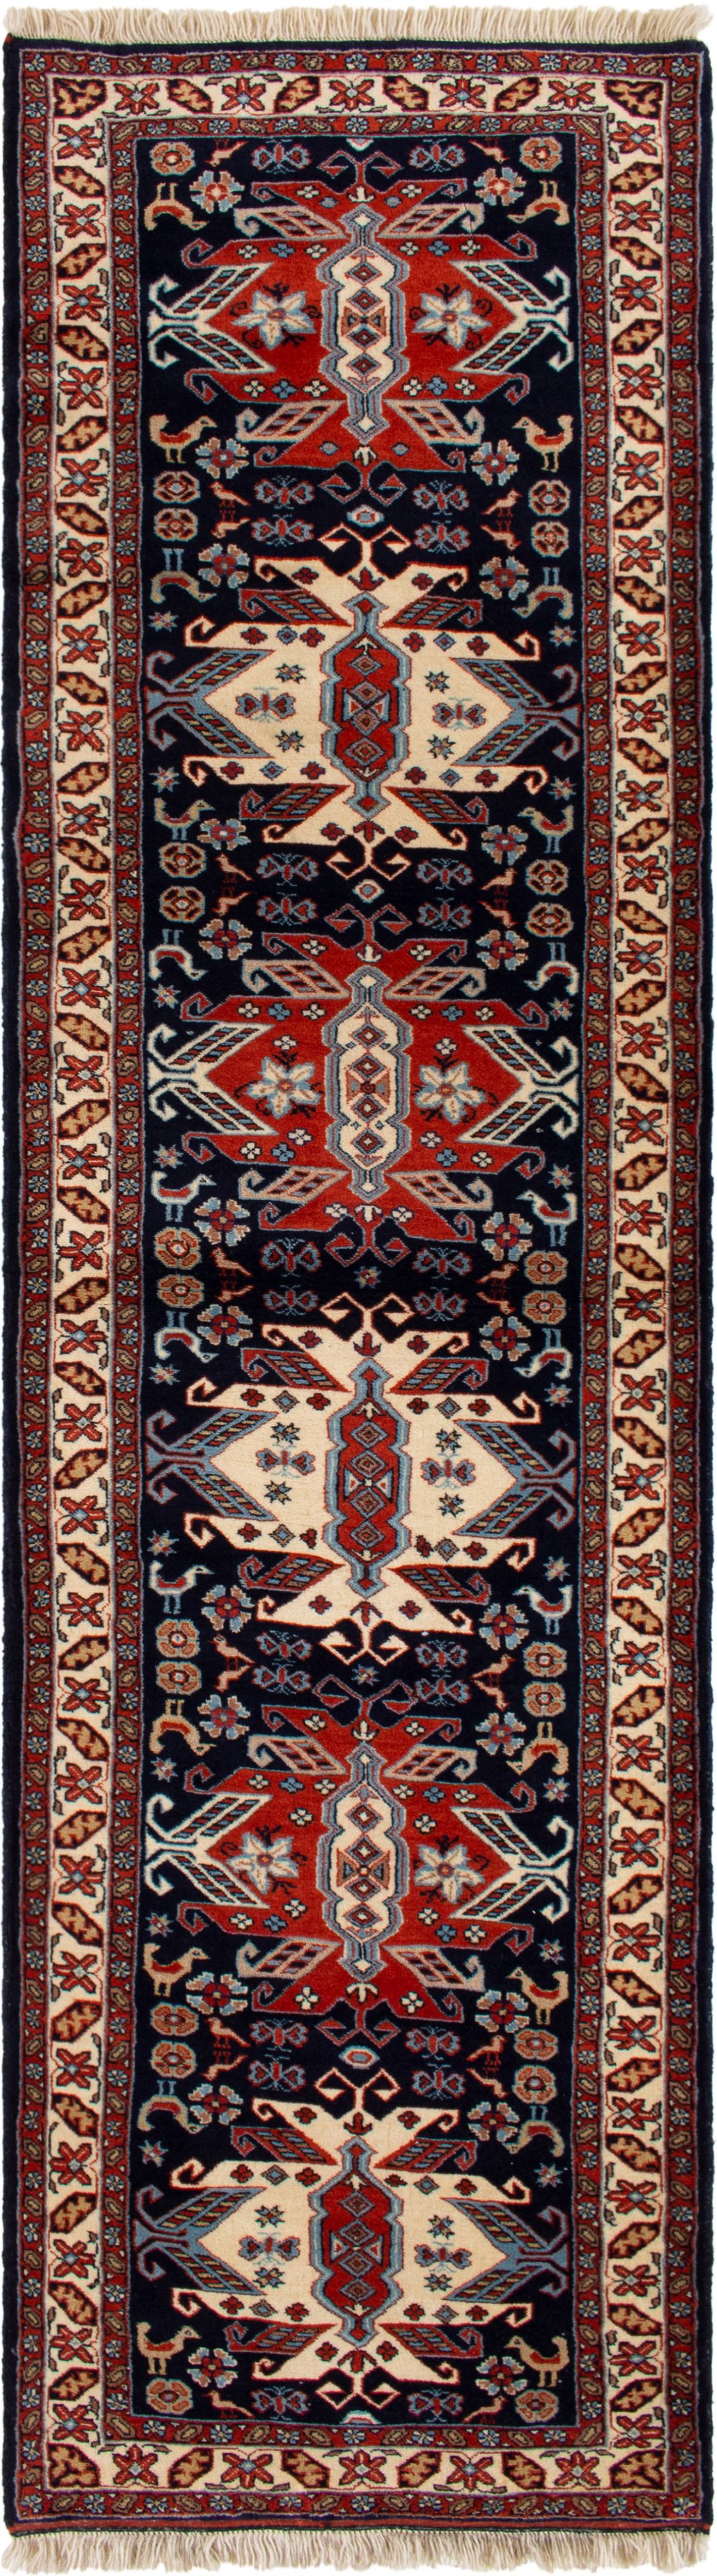 Hand-knotted Afshar  Wool Rug 2'9" x 10'2" Size: 2'9" x 10'2"  